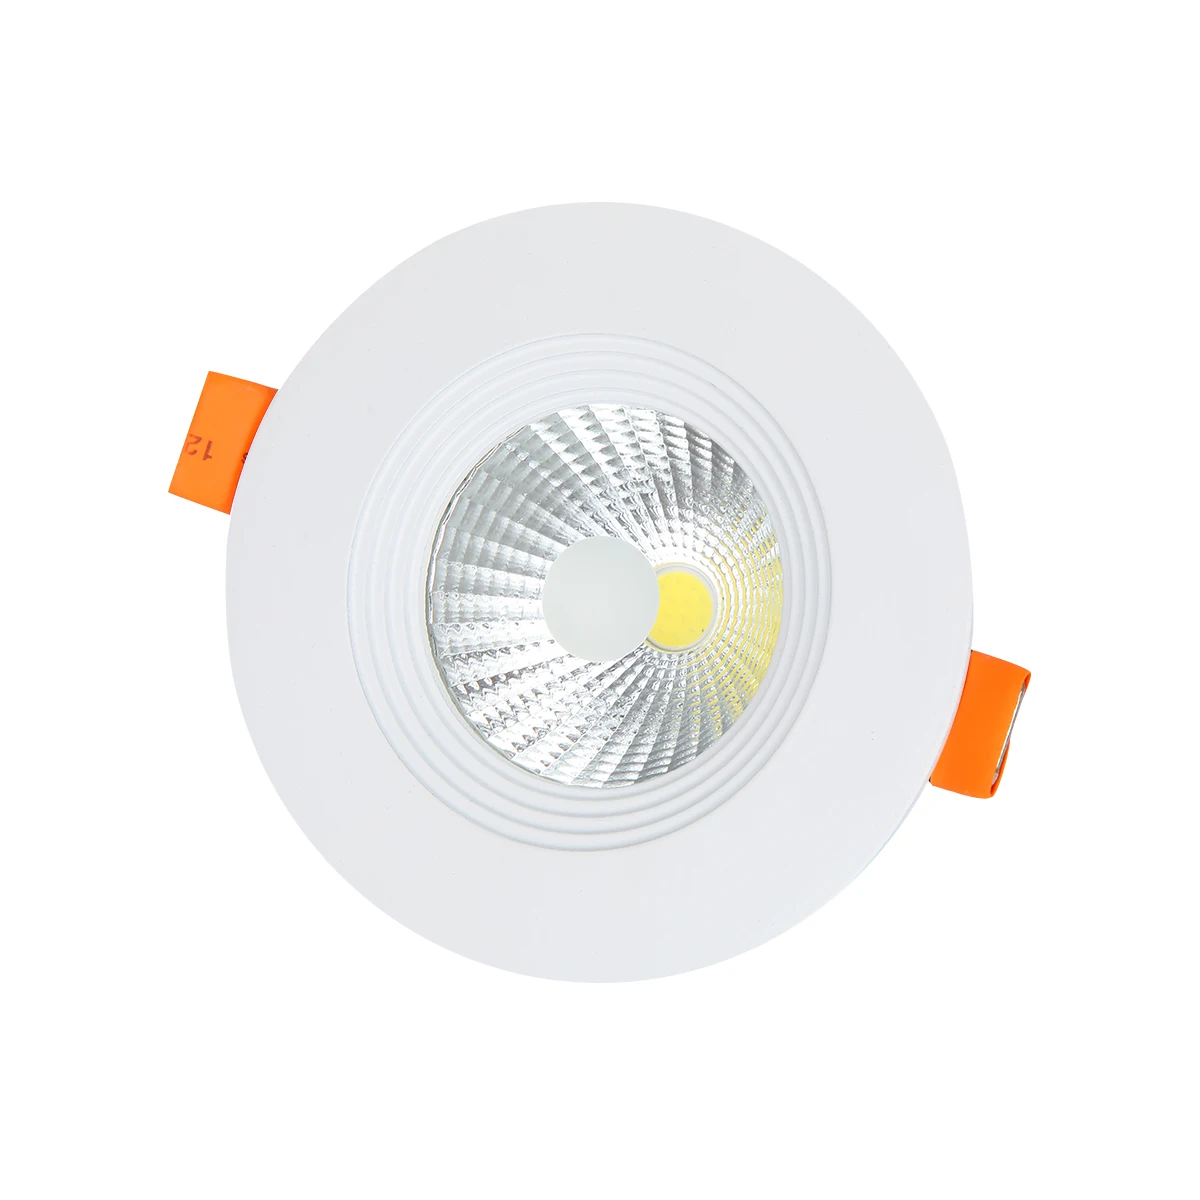 China factory new round led panel down light